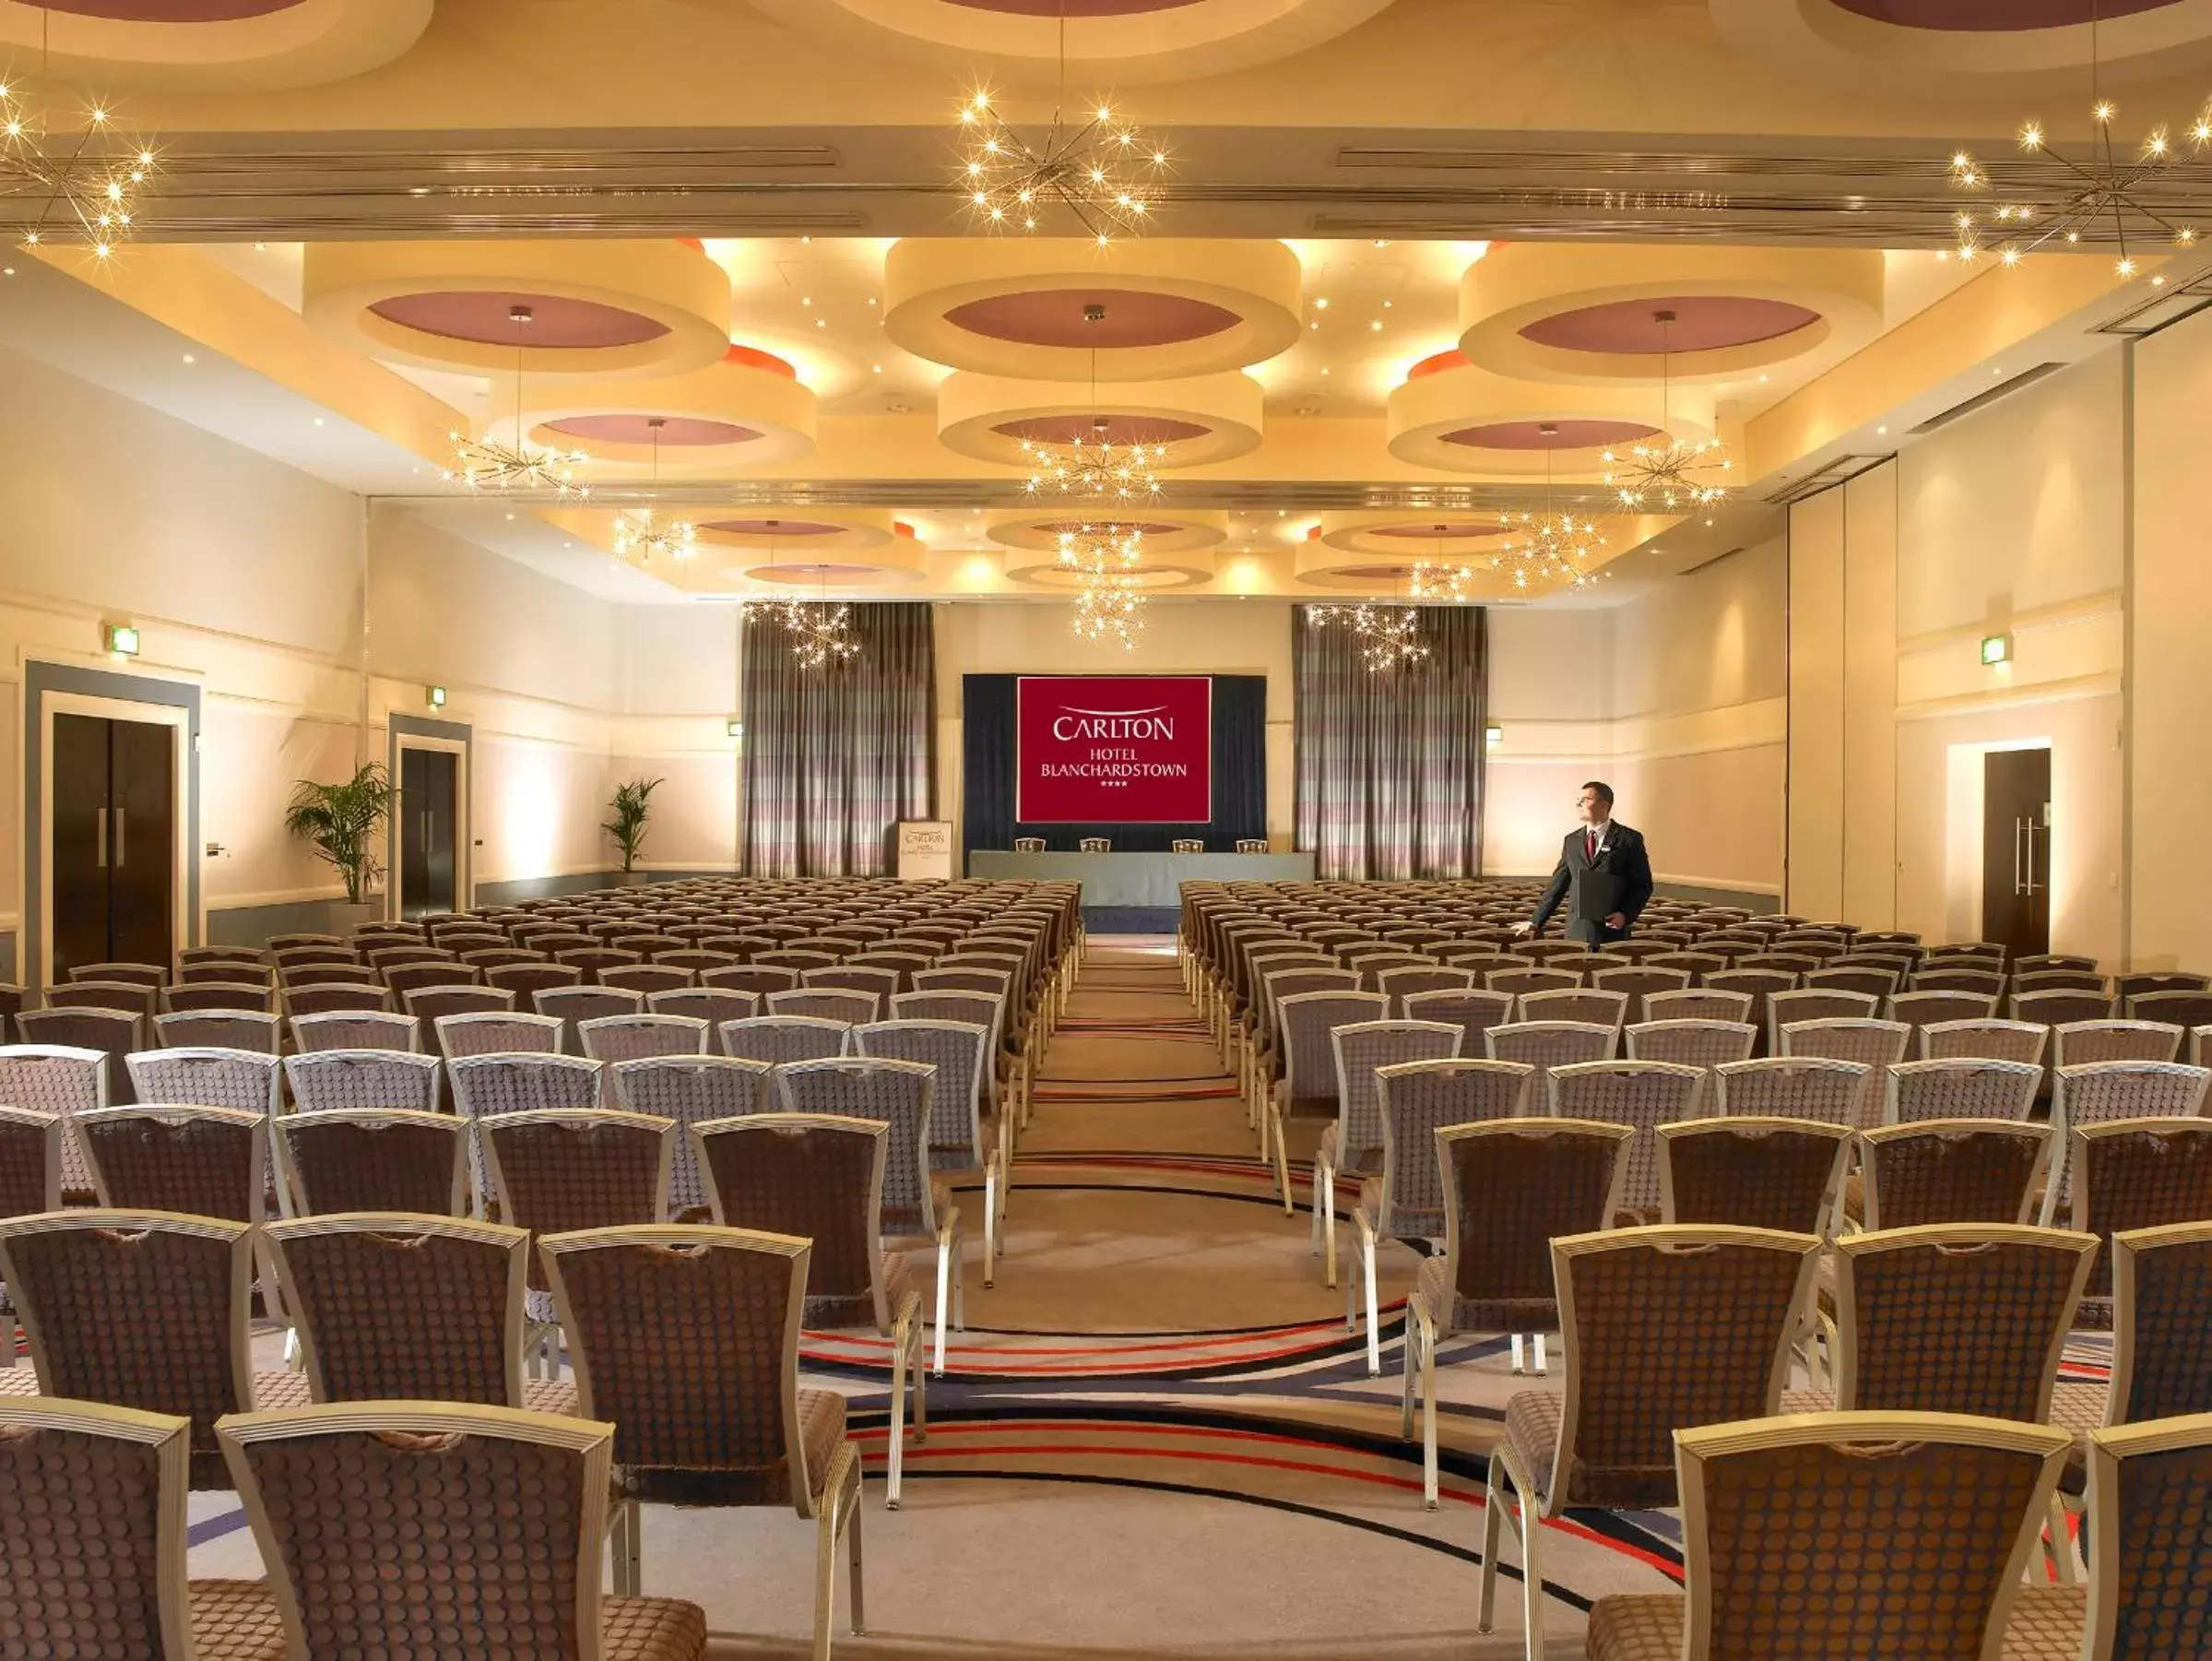 Business facilities in Carlton Hotel Blanchardstown